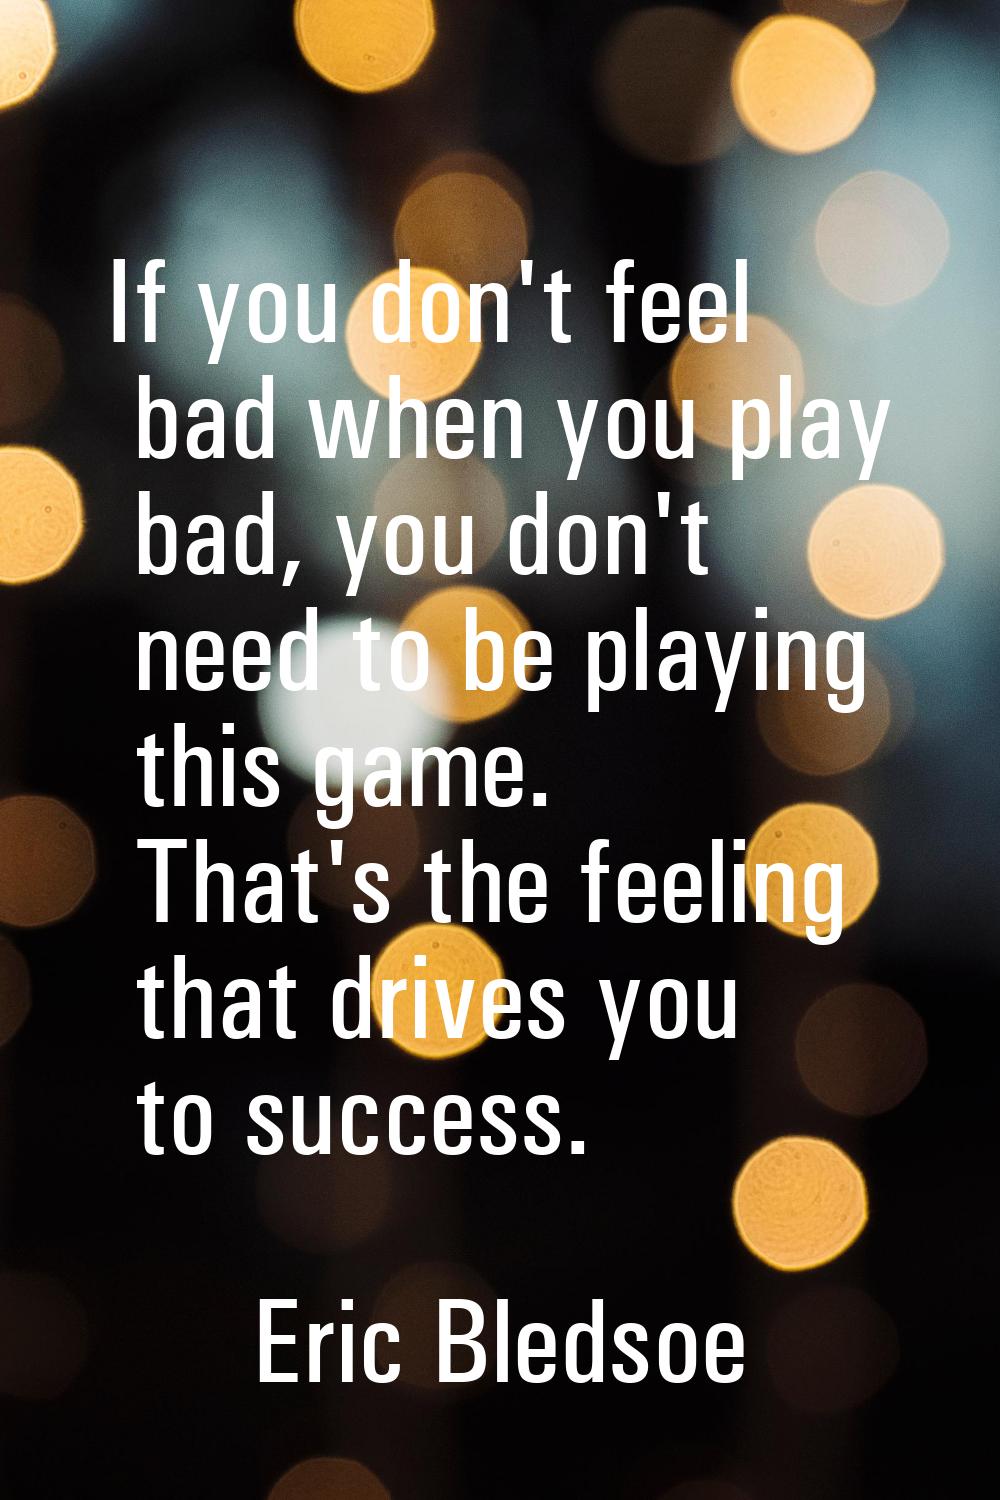 If you don't feel bad when you play bad, you don't need to be playing this game. That's the feeling